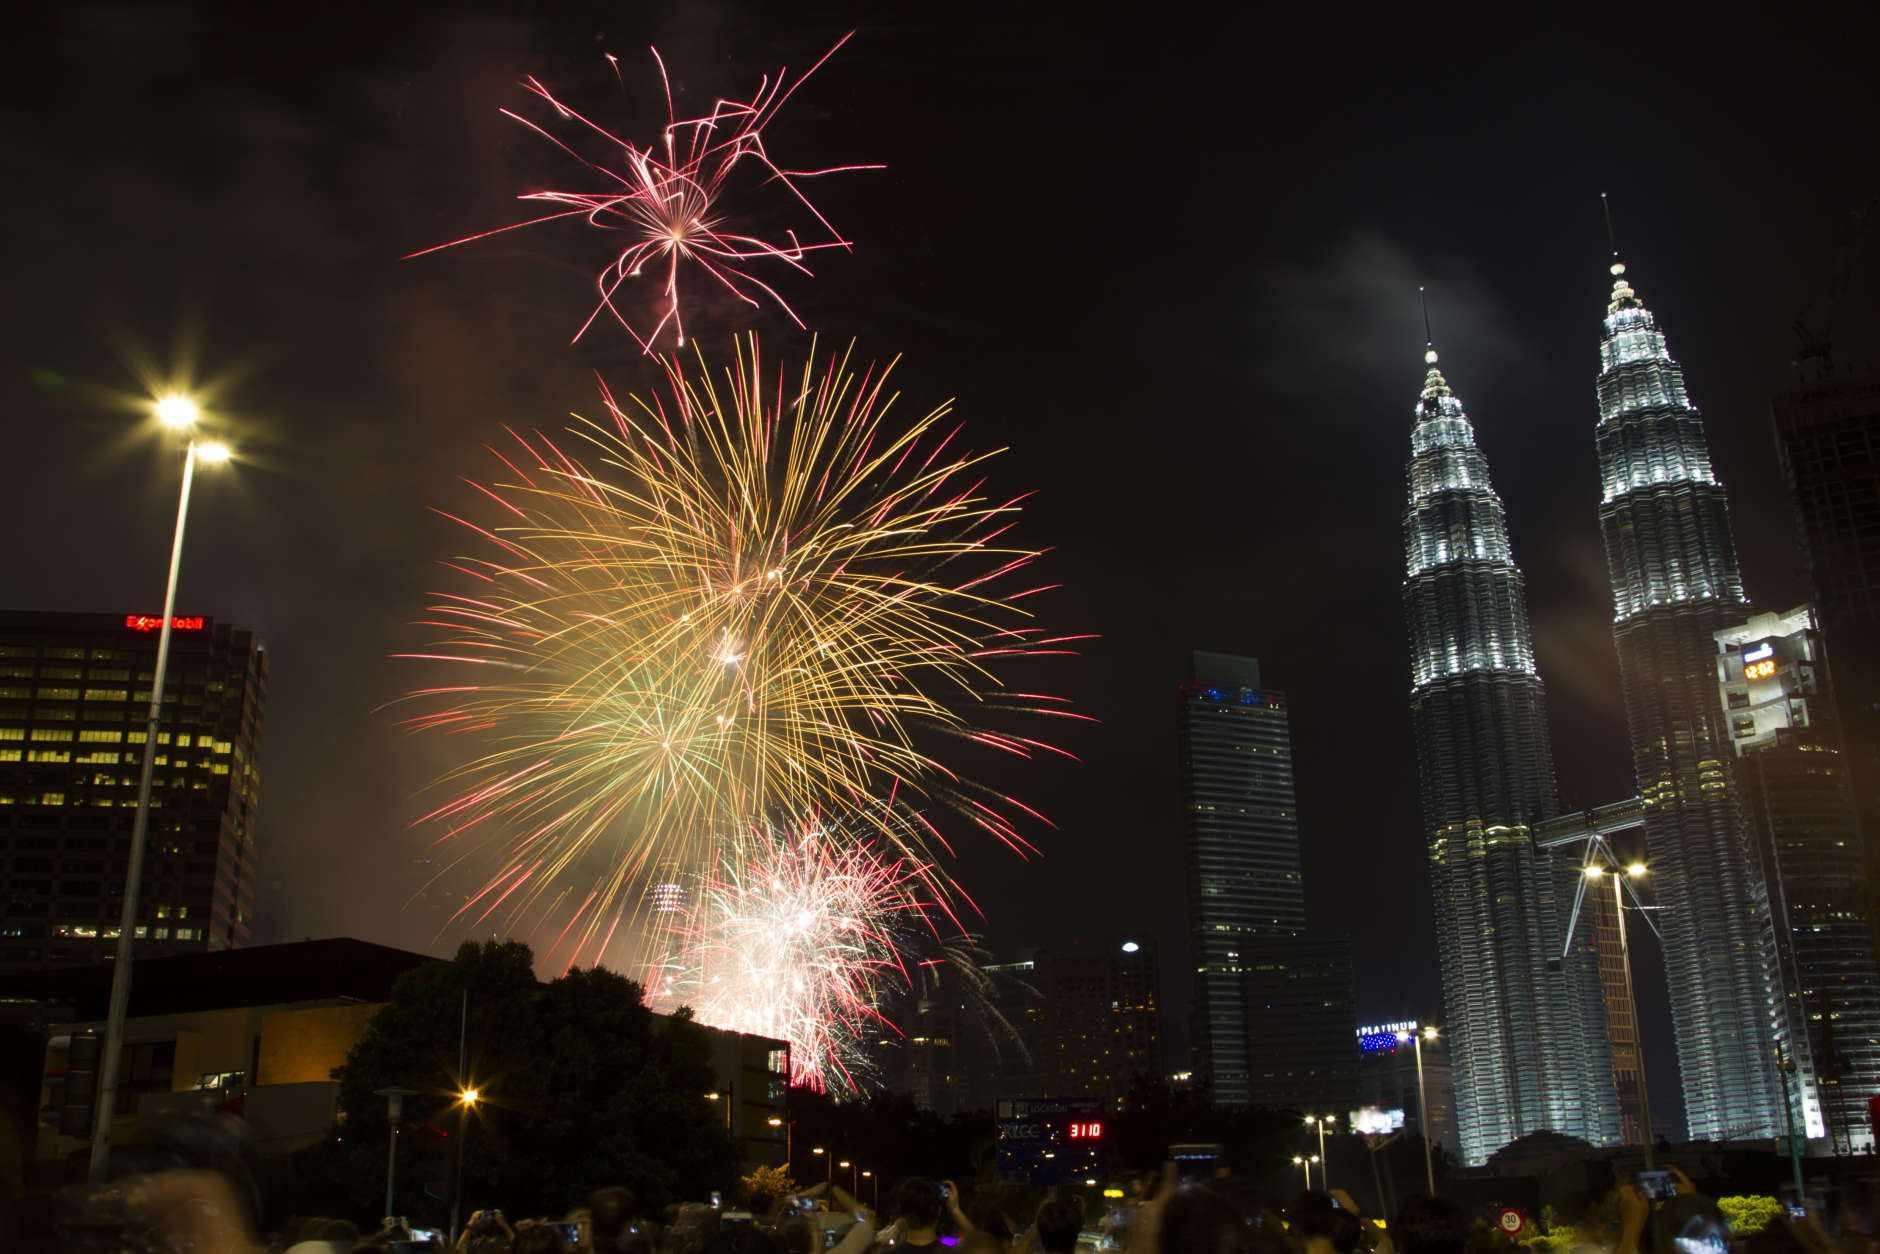 Fireworks explode in front of Malaysia's landmark building, Petronas Twin Towers, during the New Year's Eve celebration in Kuala Lumpur, Malaysia, early Sunday, Jan. 1, 2017. (AP Photo/Lim Huey Teng)